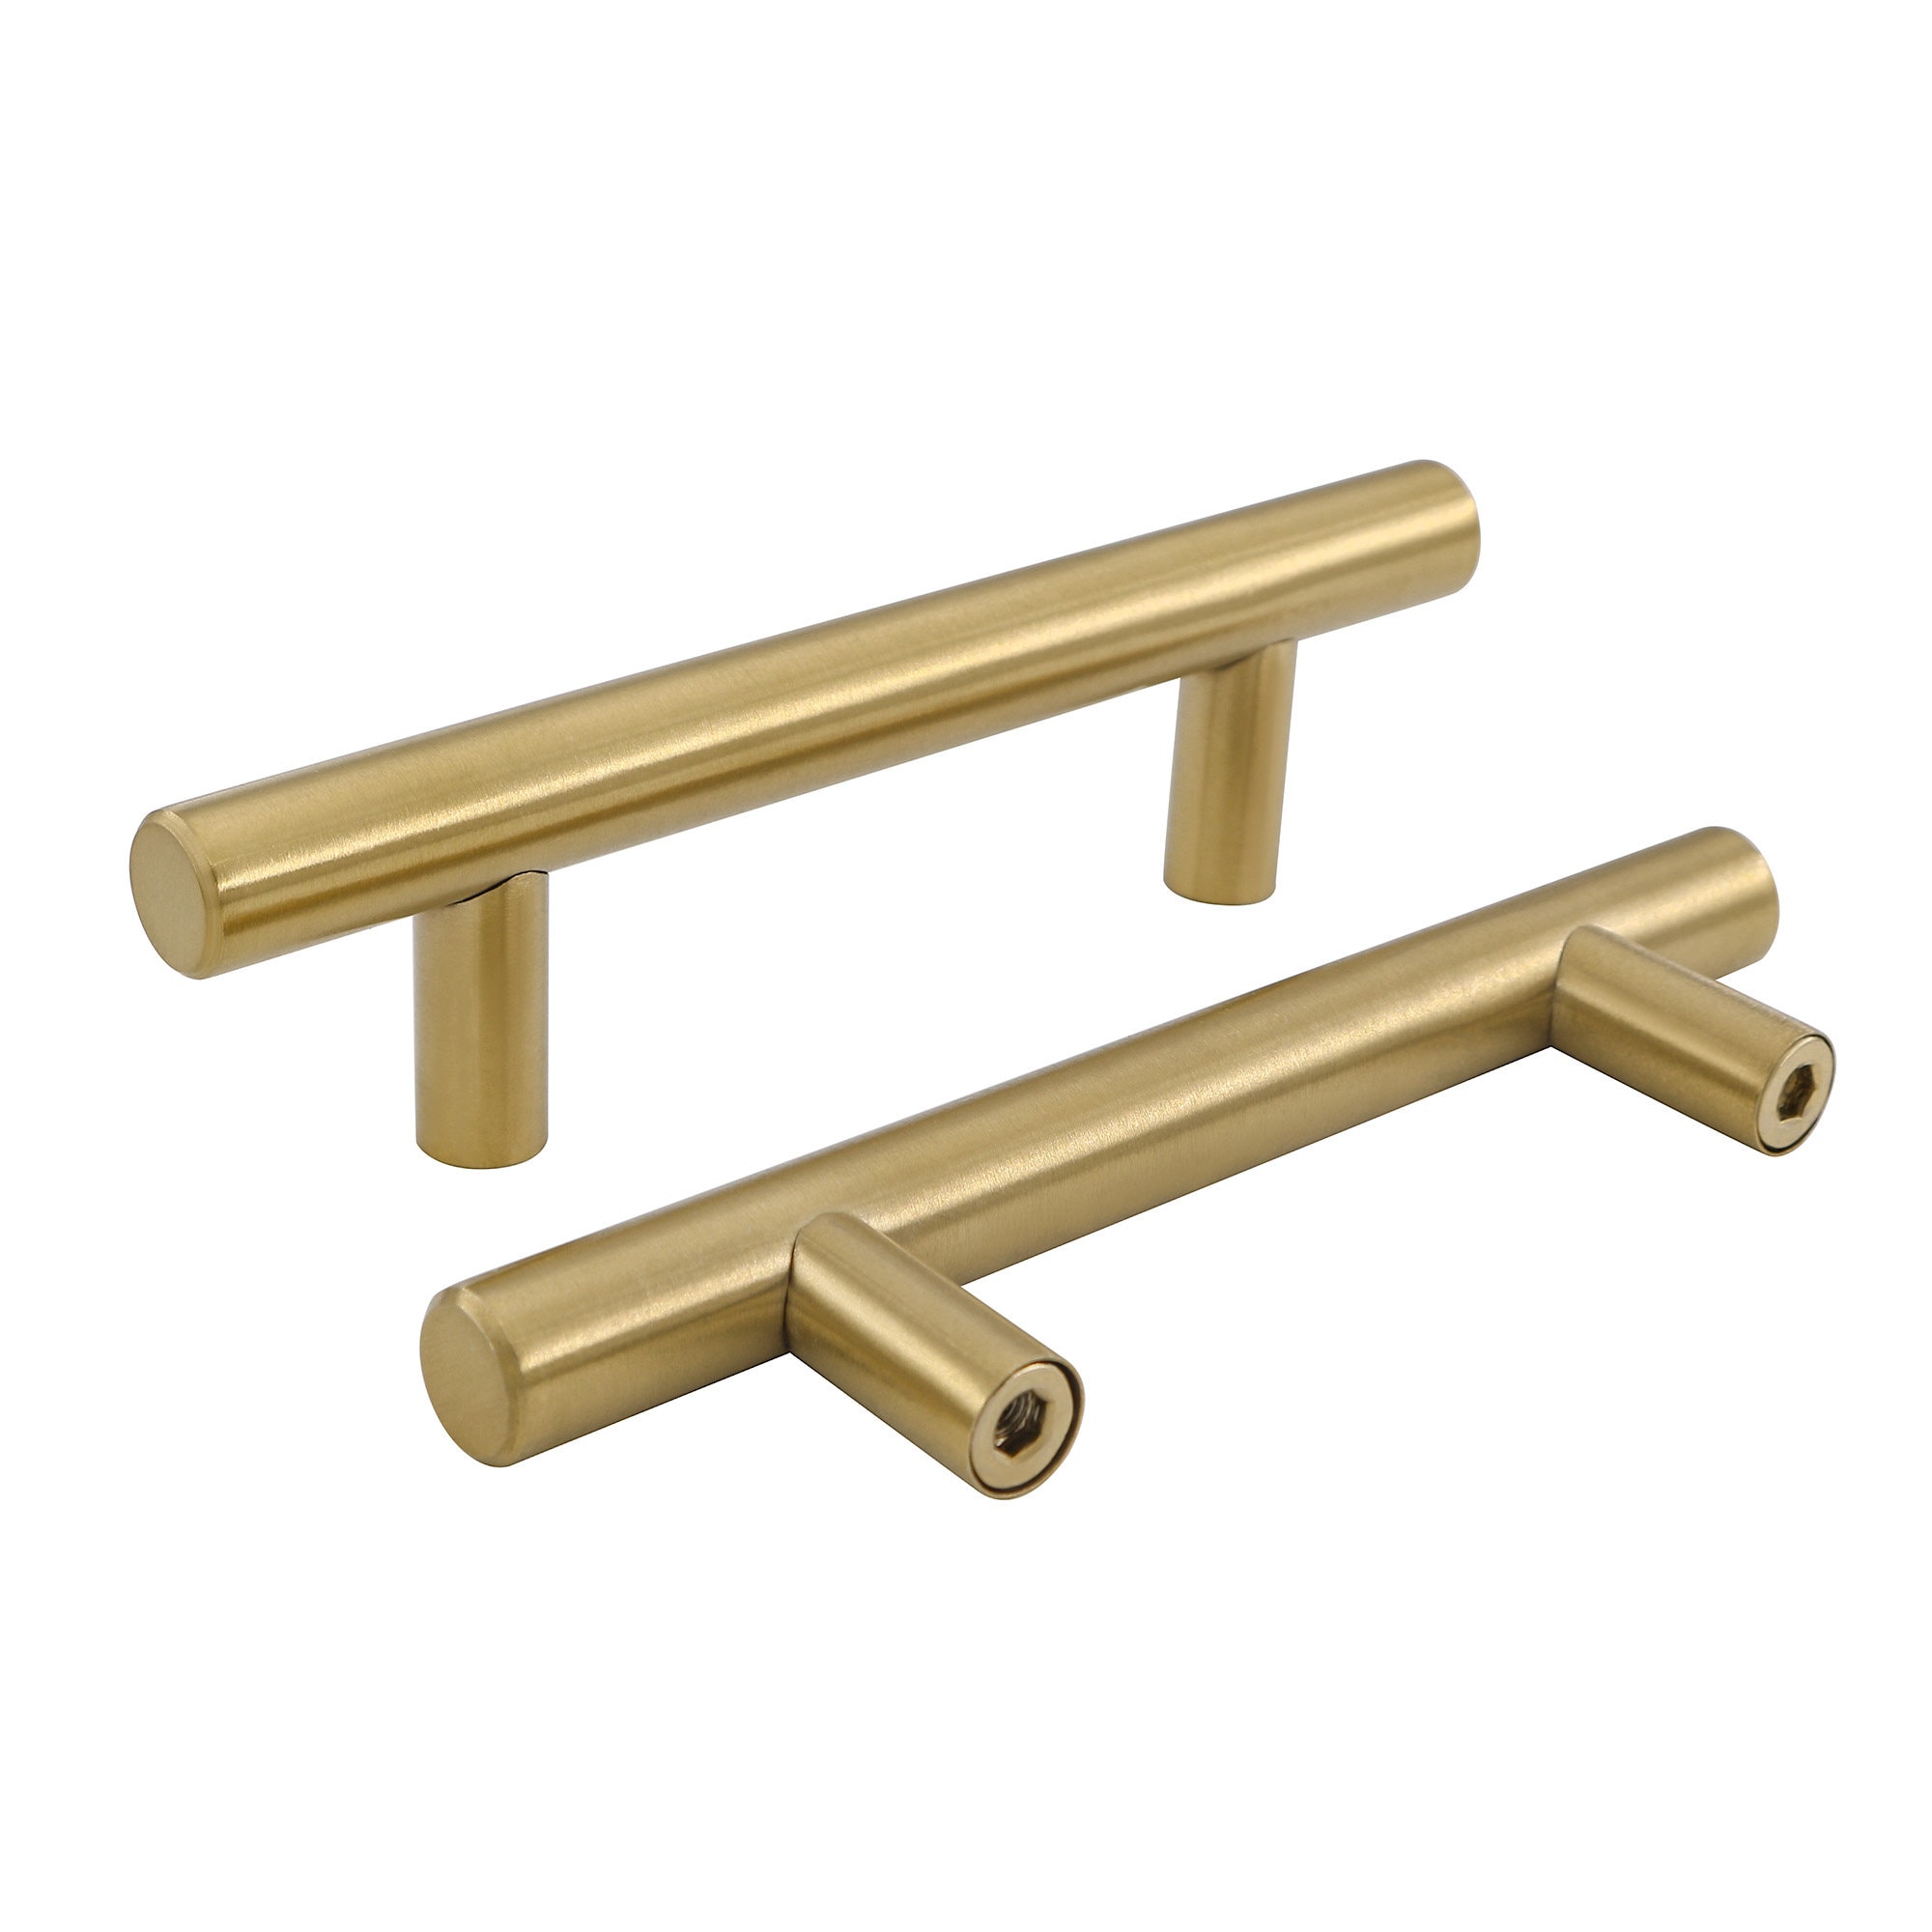 3 Inch Cabinet Pulls Brushed Brass, Brass Cabinet Hardware 3 Inch